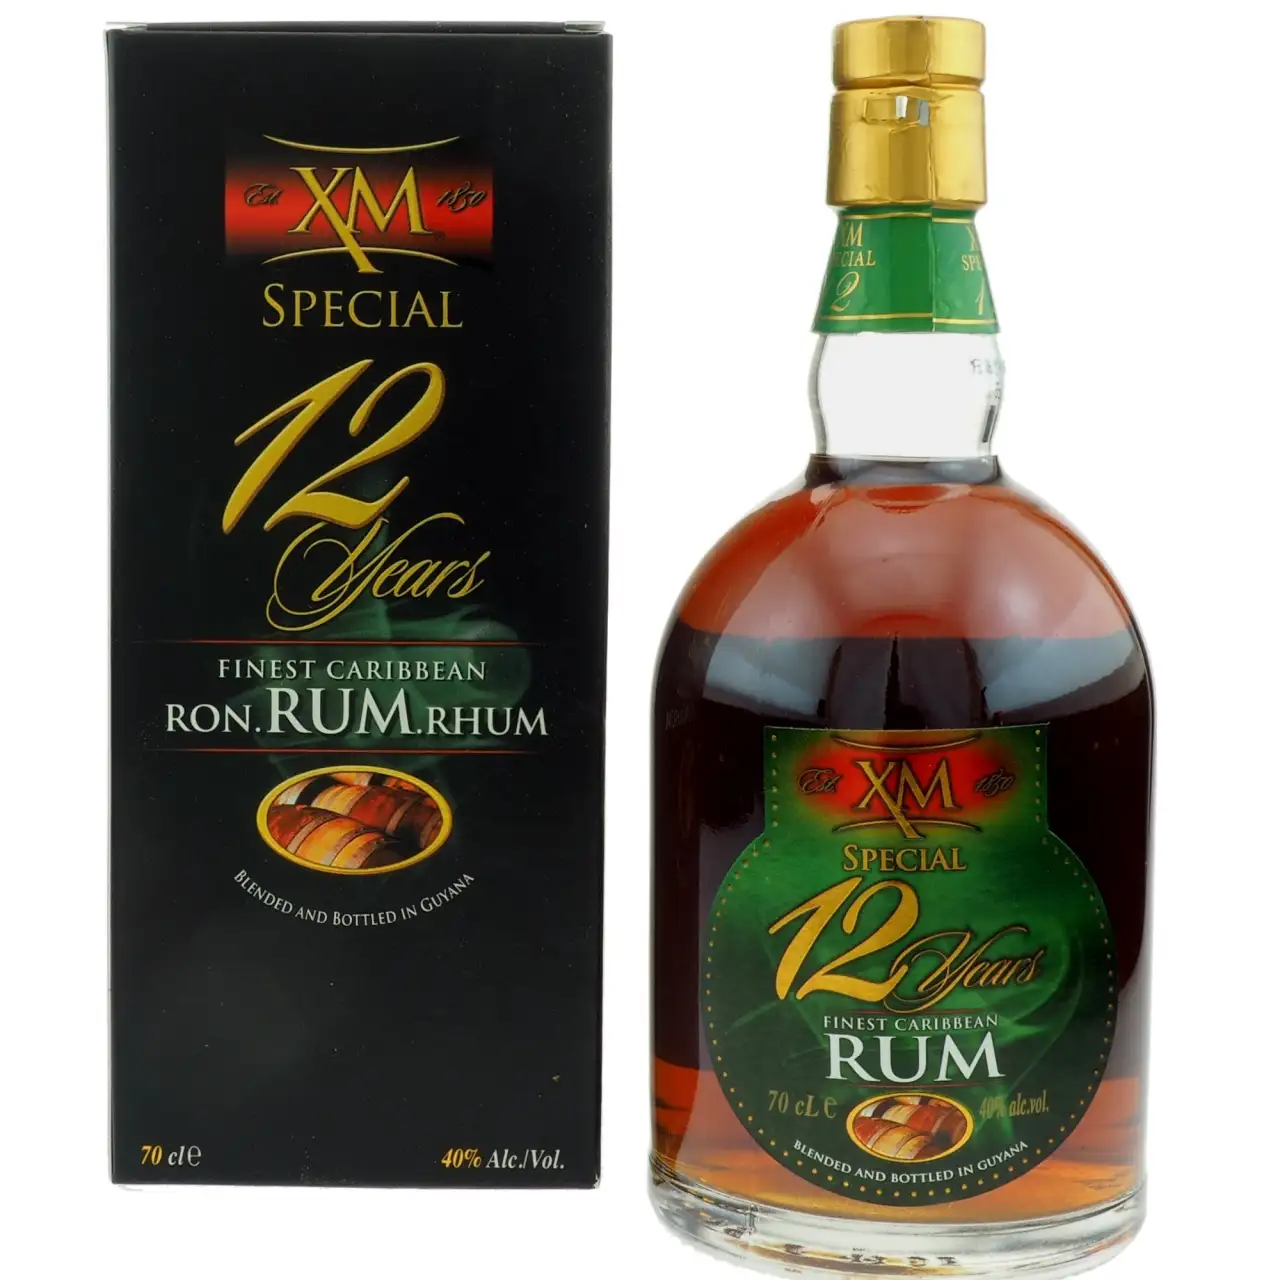 Image of the front of the bottle of the rum Special 12 Years